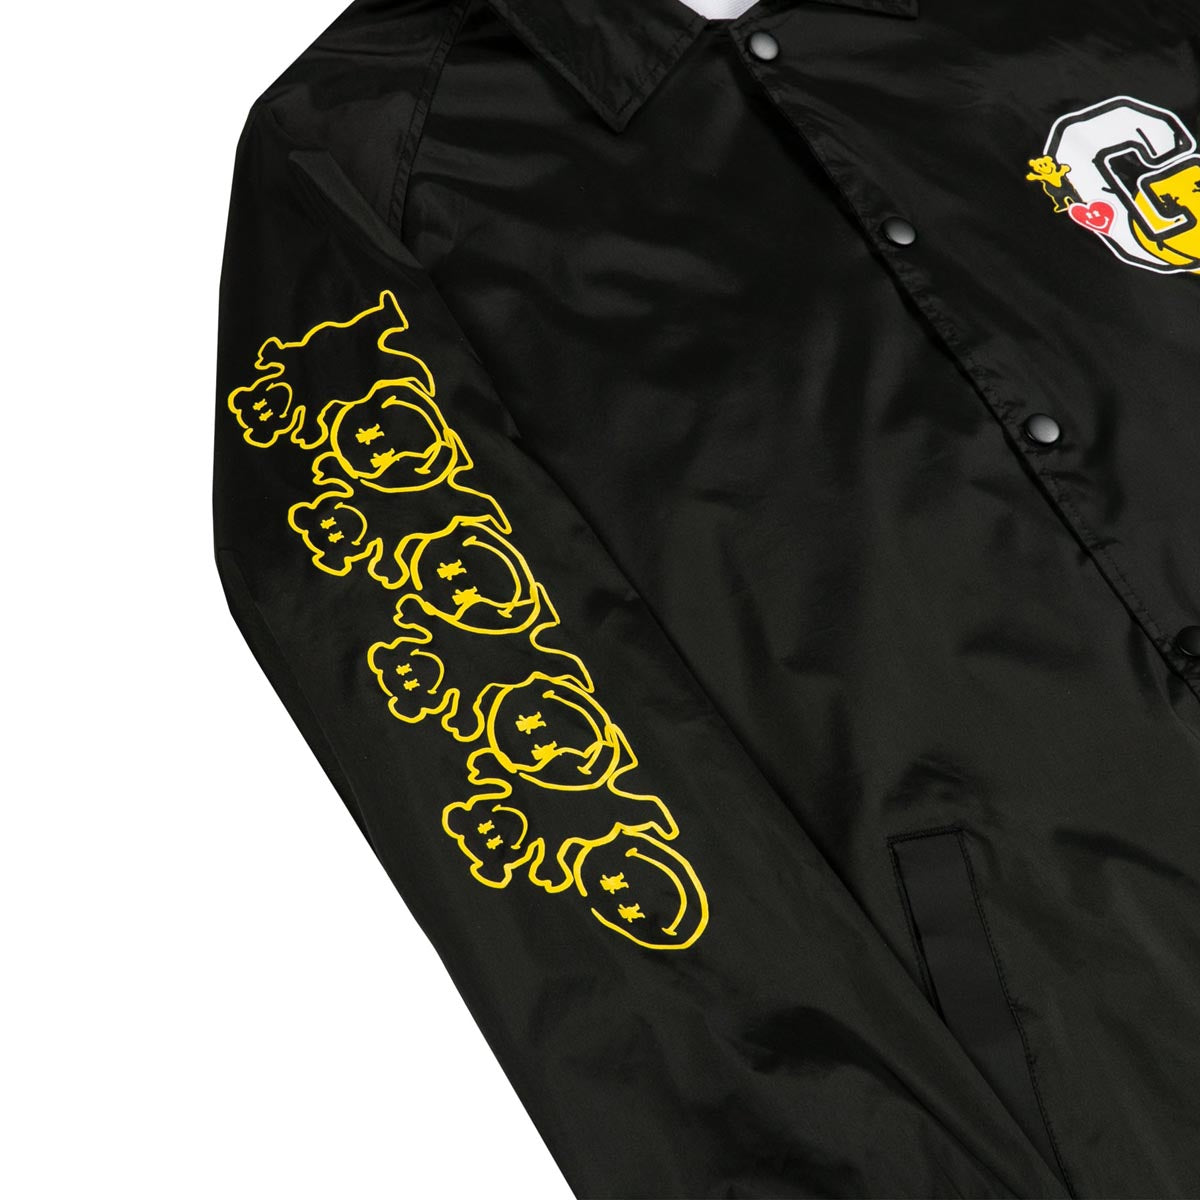 Grizzly x Smiley World Coach Jacket - Black image 2